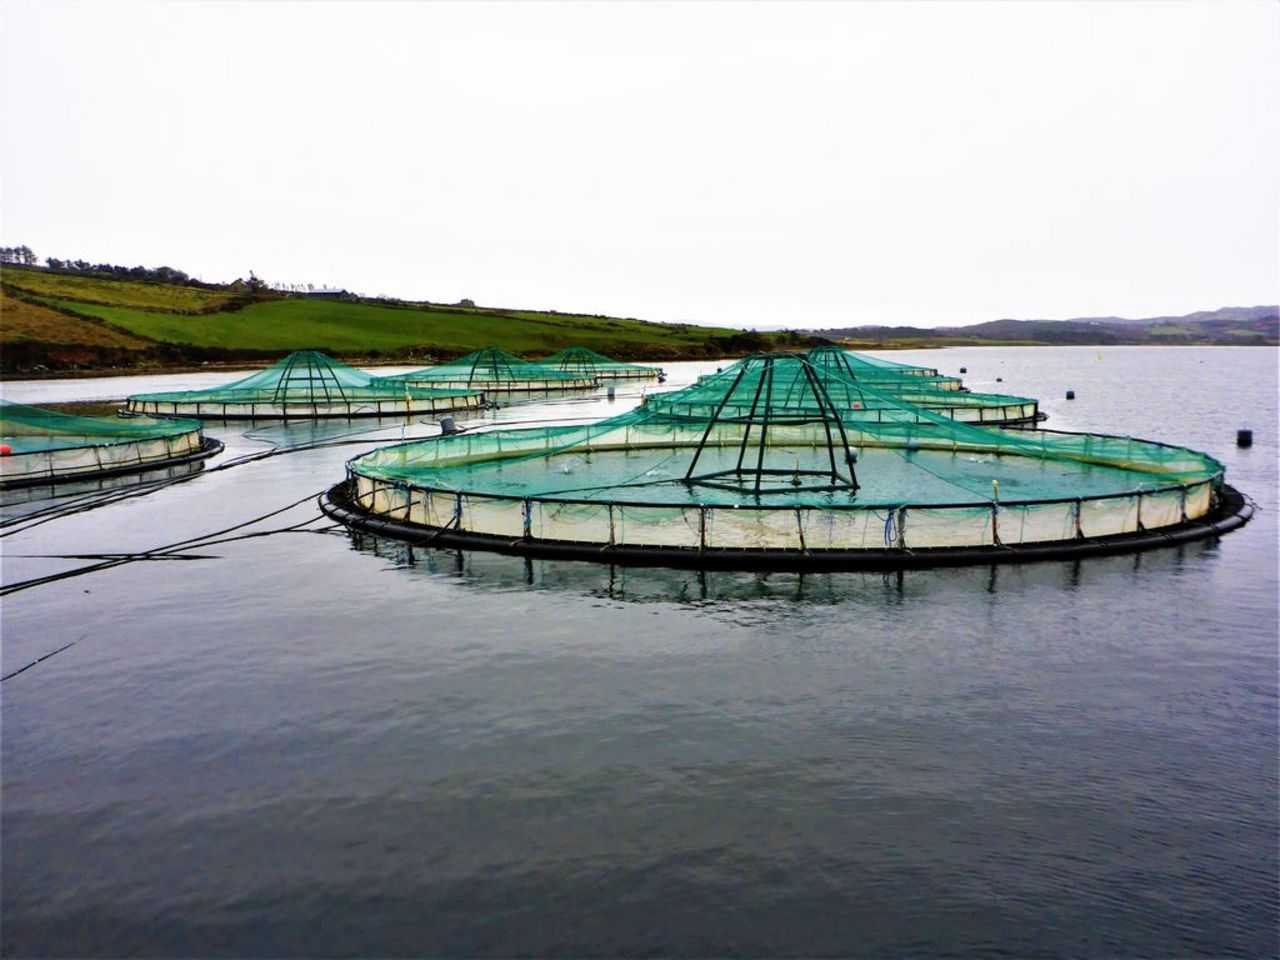 Netcages for Atlantic Salmon production off the West coast of Ireland